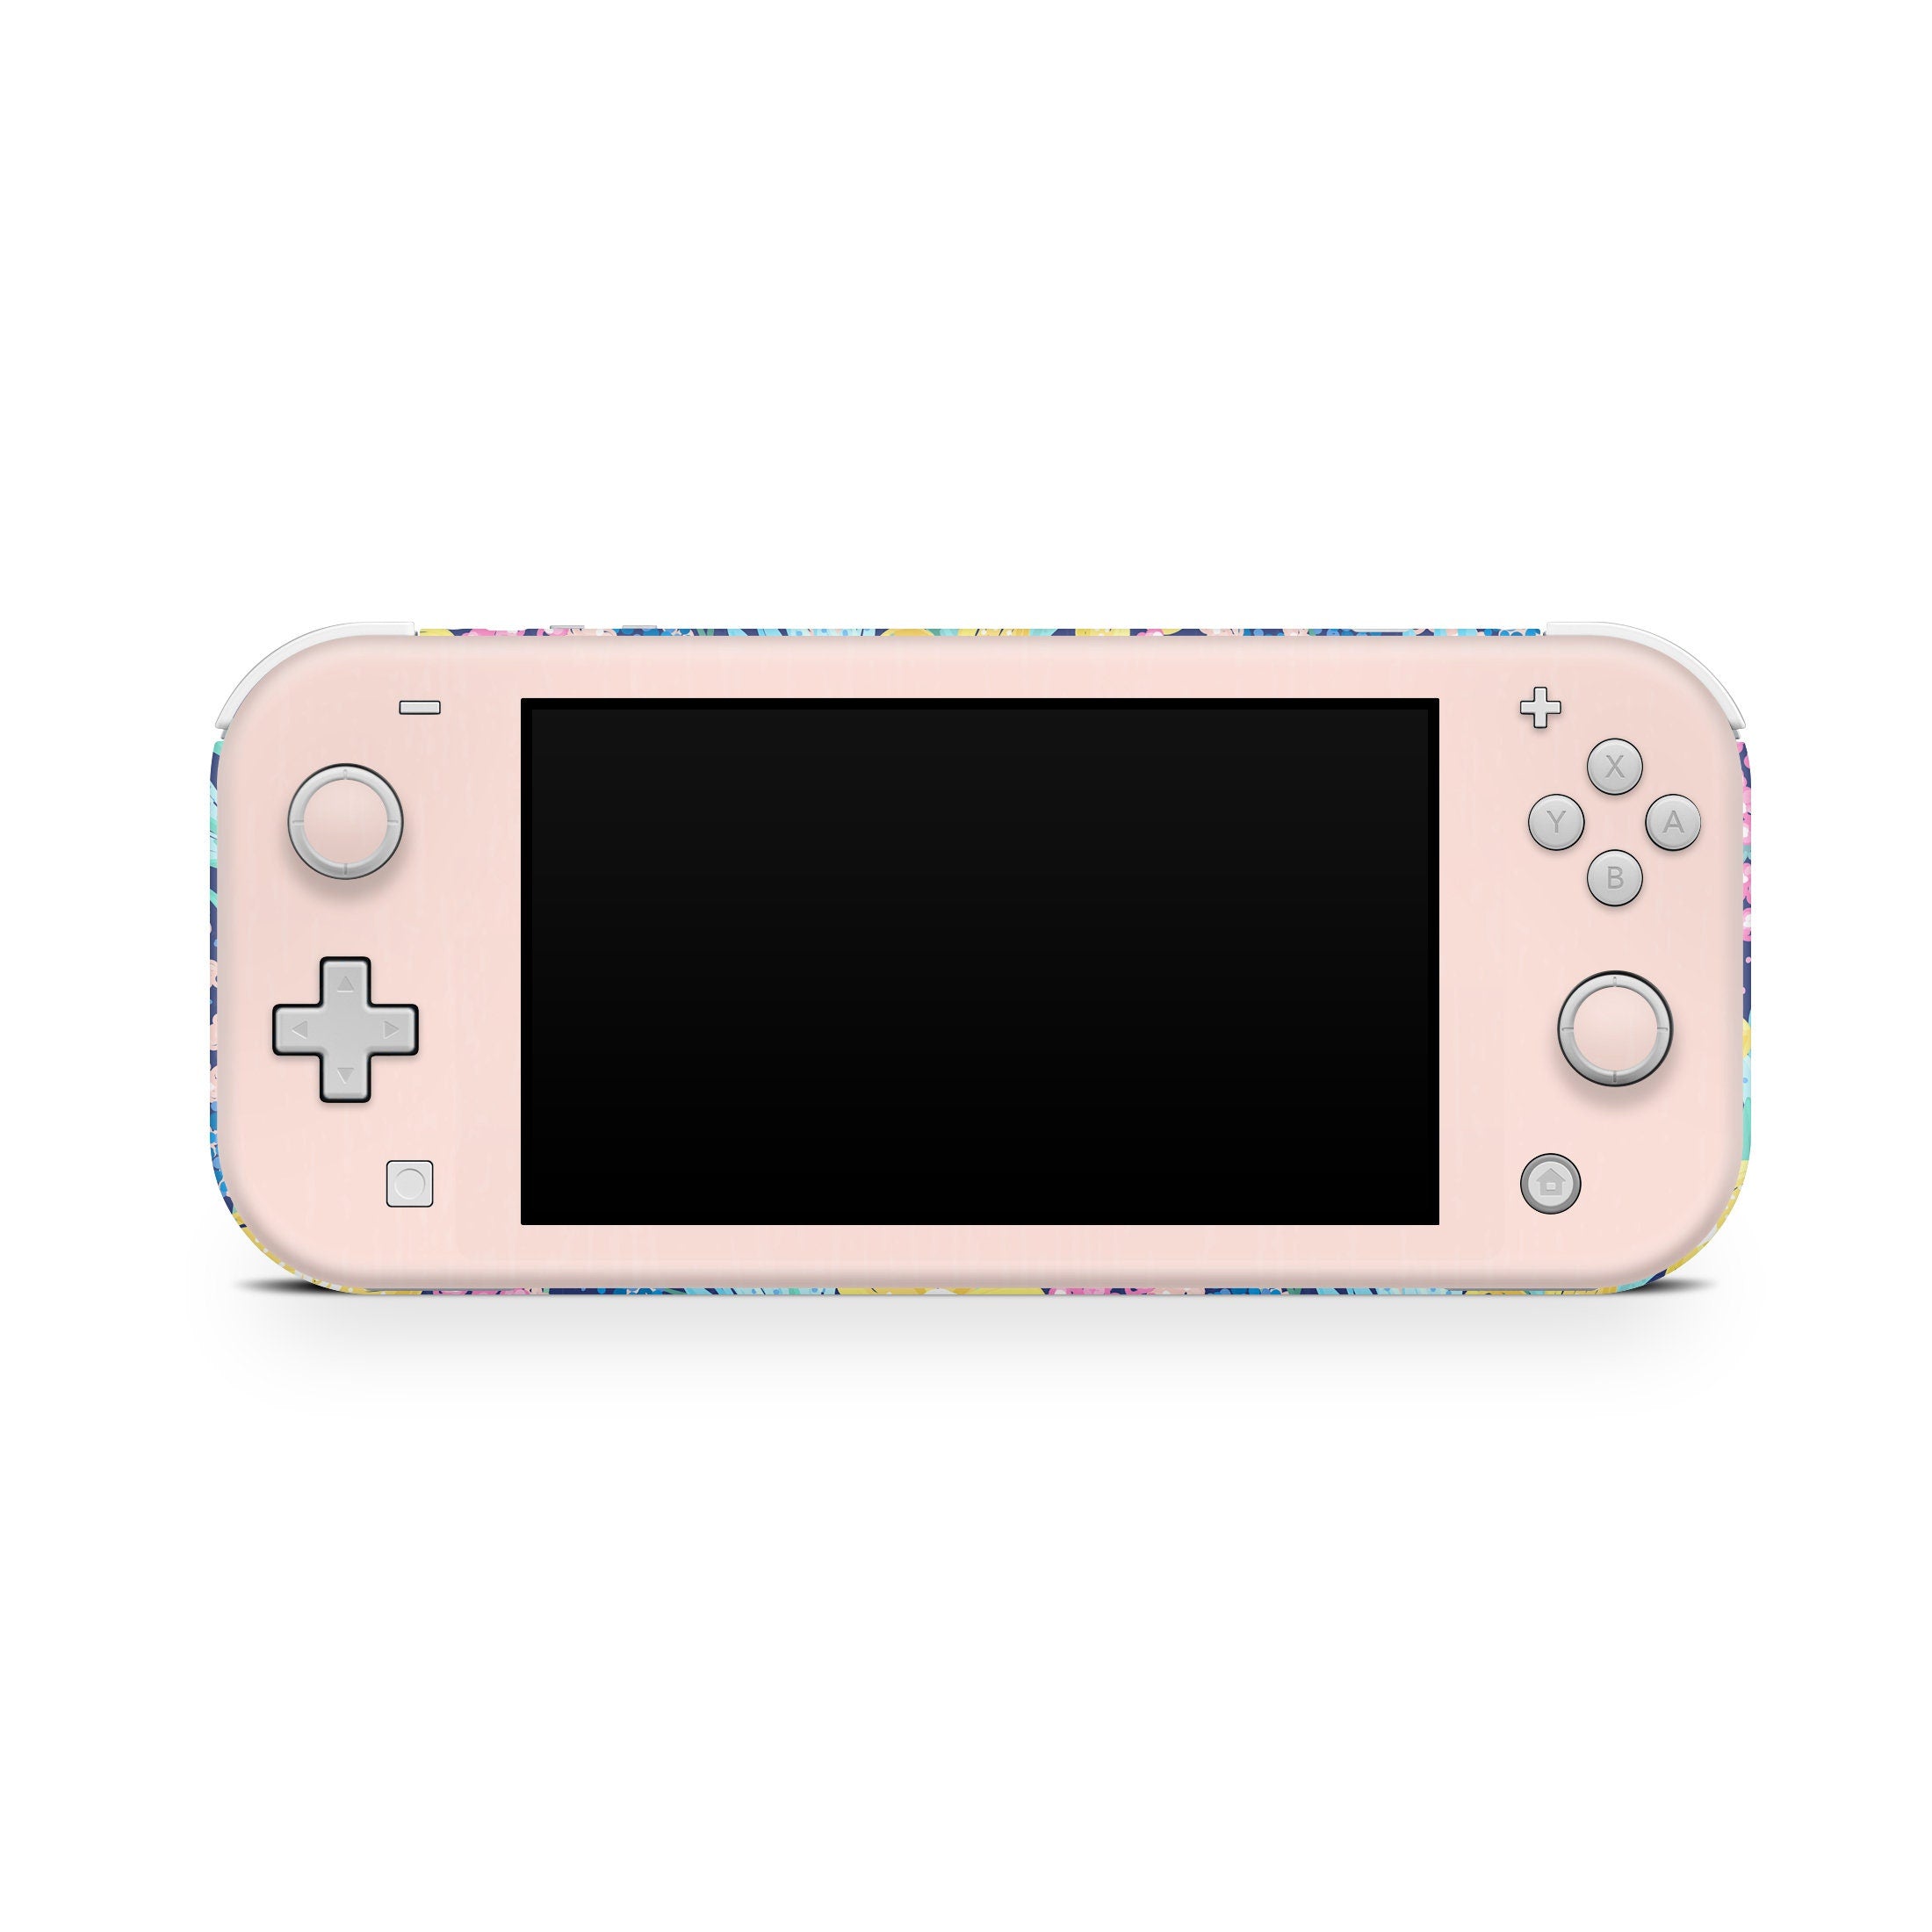 Nintendo switch Lite skin pink watercolor, Flowers BLOSSOM switch lite skin pastel Full cover 3m